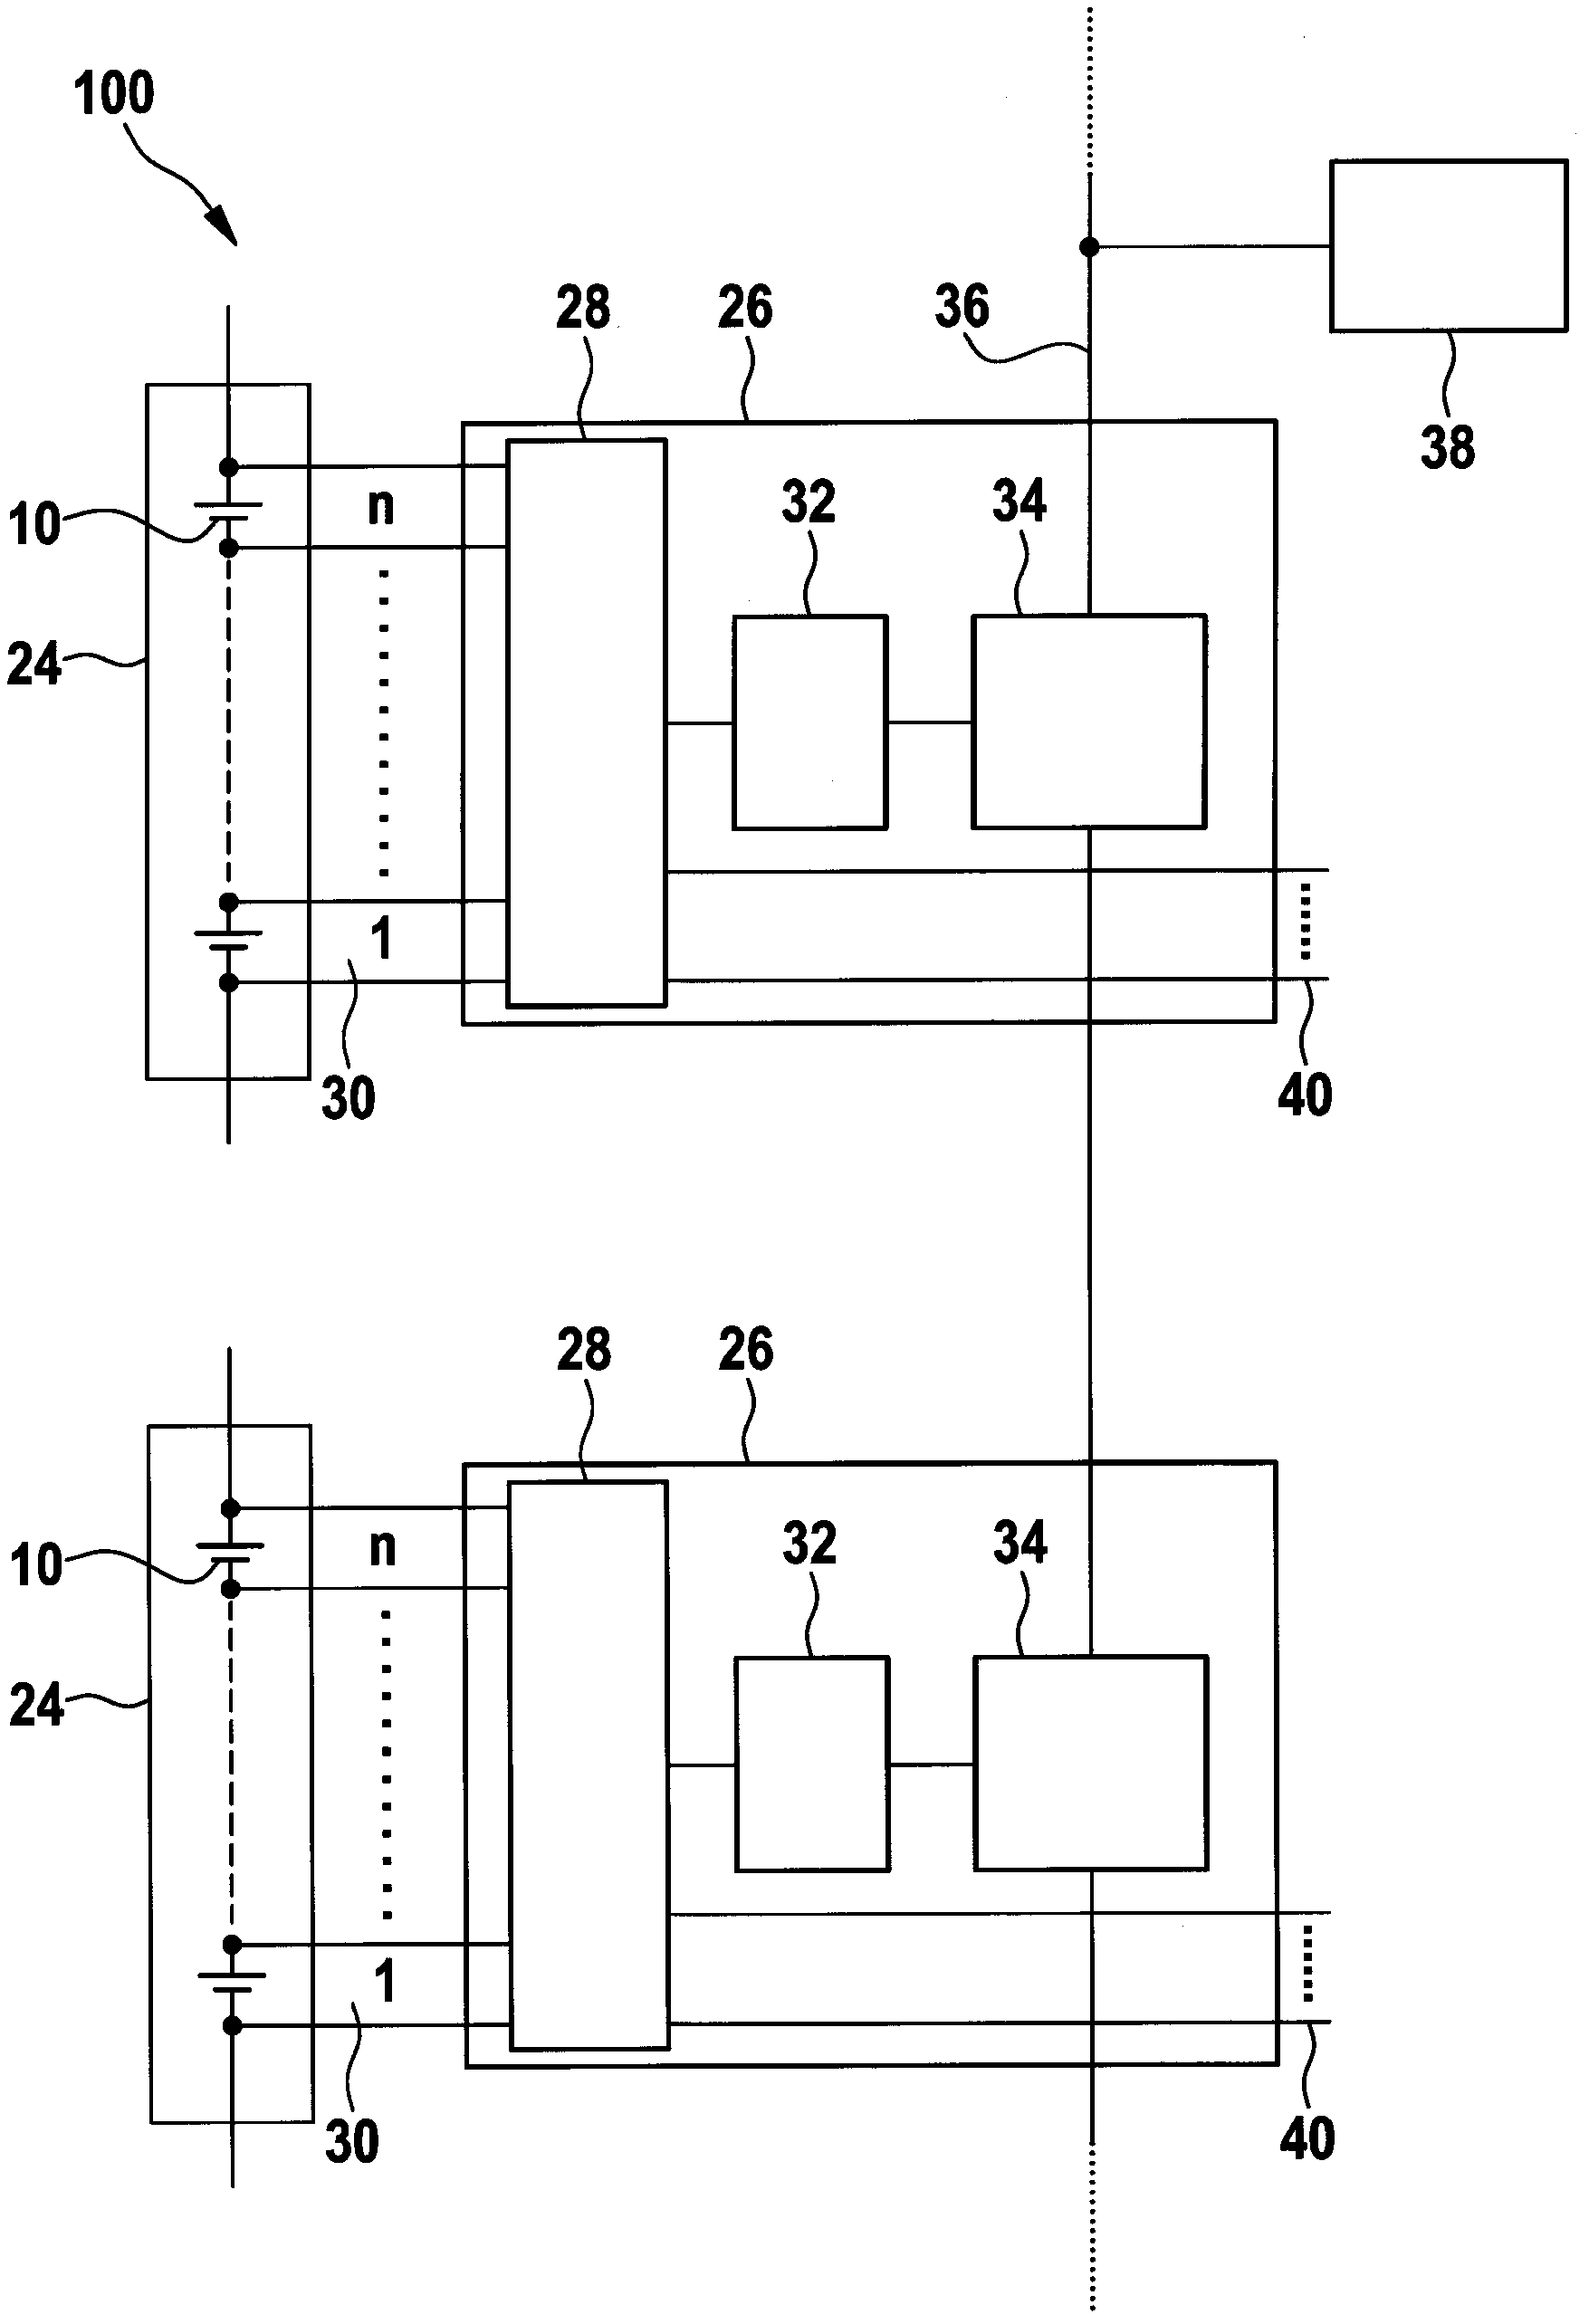 Battery system for measuring battery module voltages